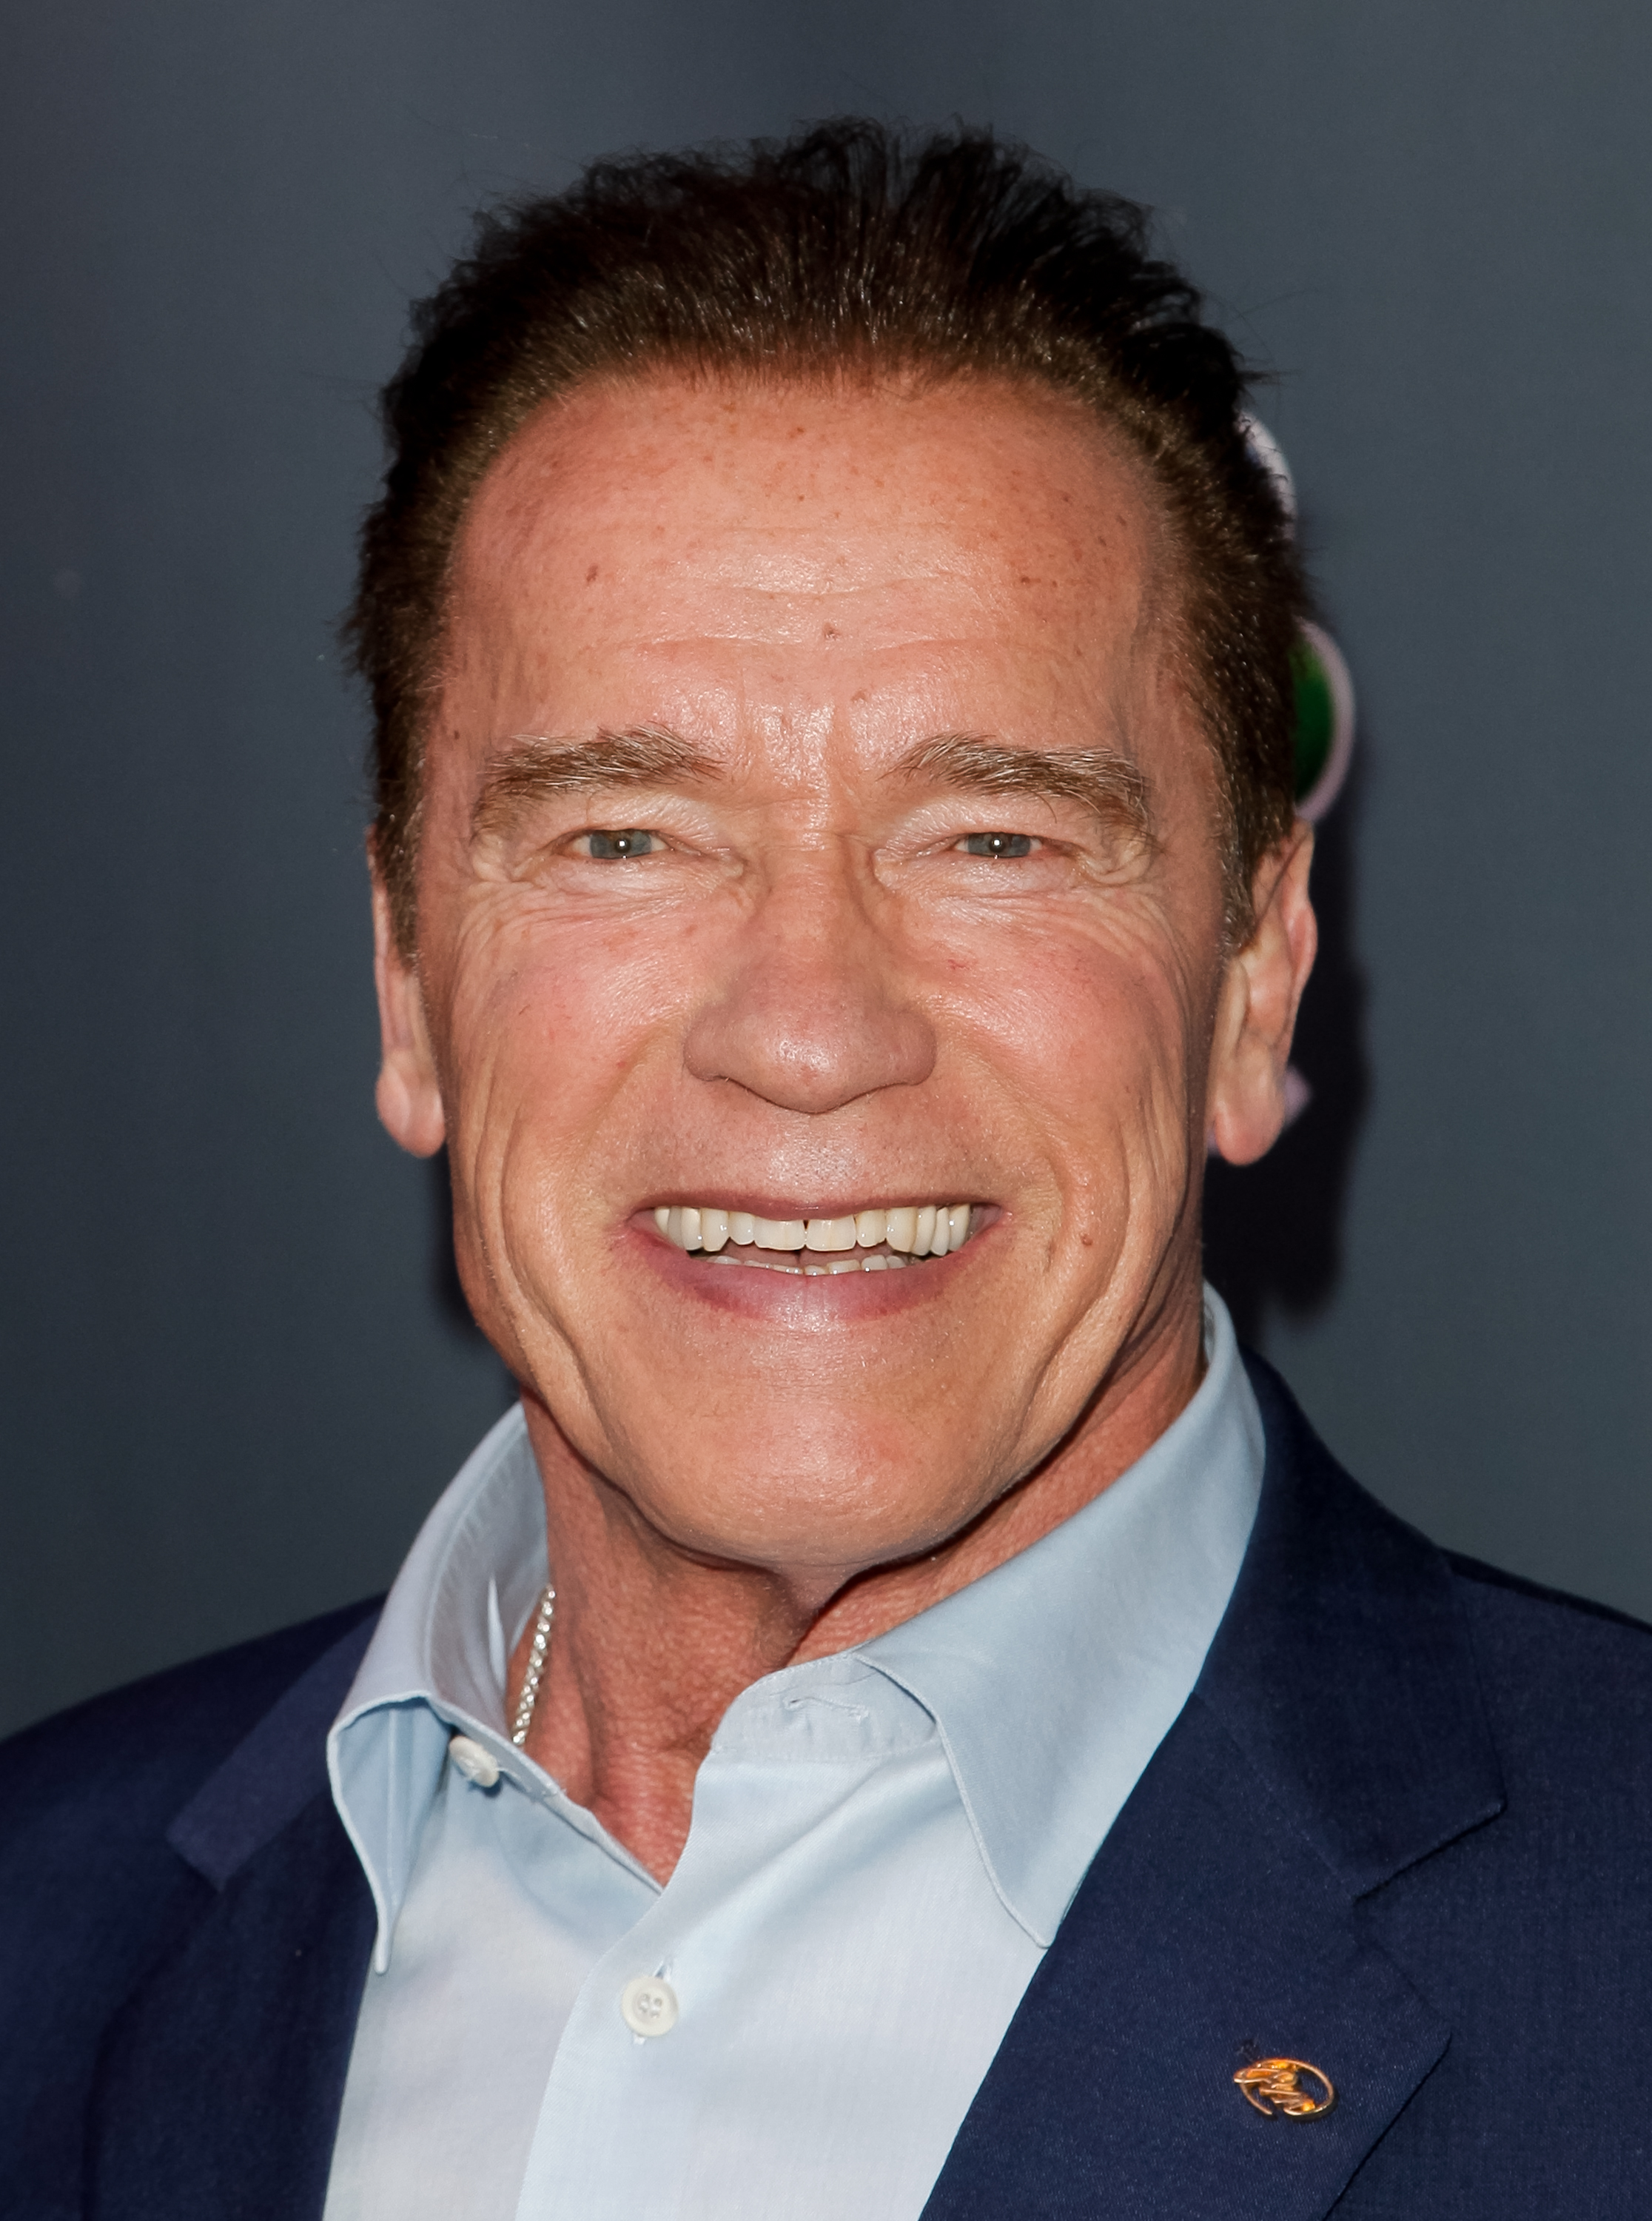 Arnold Schwarzenegger at the Q&A for NBC's 'The New Celebrity Apprentice' in Universal City, California on December 9, 2016 | Source: Getty Images